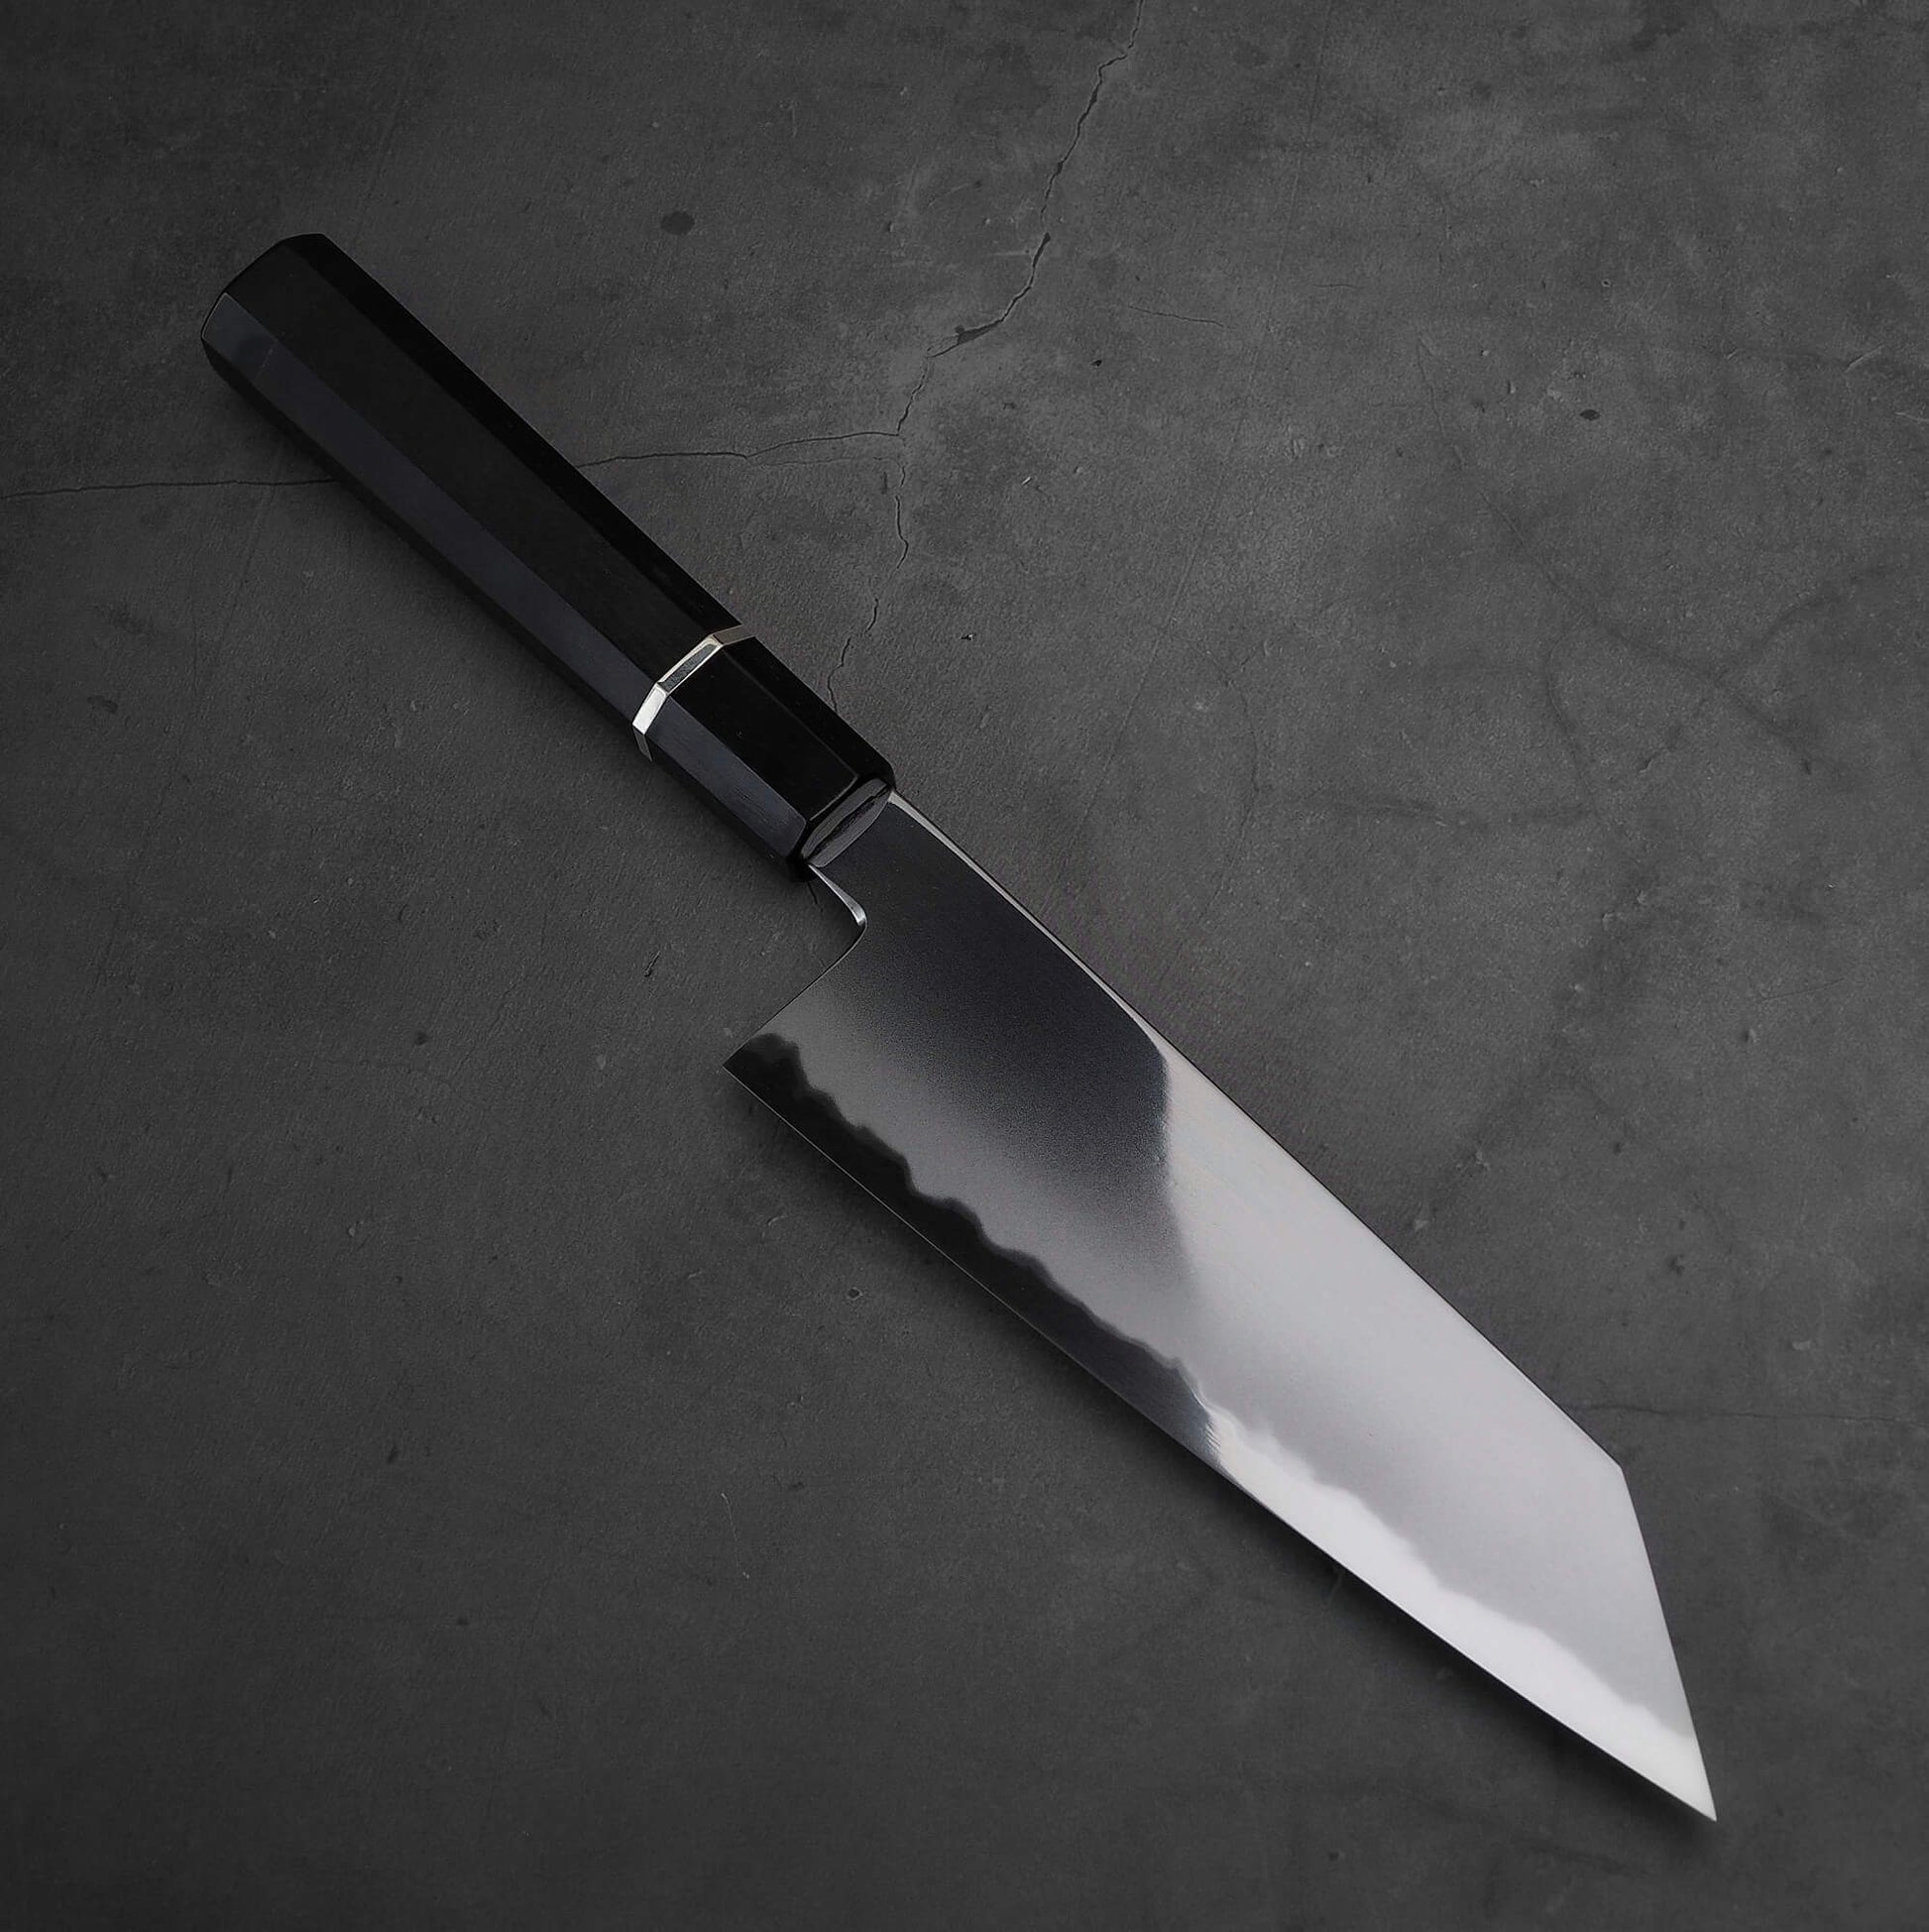 Angled view of Yoshikazu Tanaka AS bunka. This hand-forged Japanese knife is made of aogami super steel.